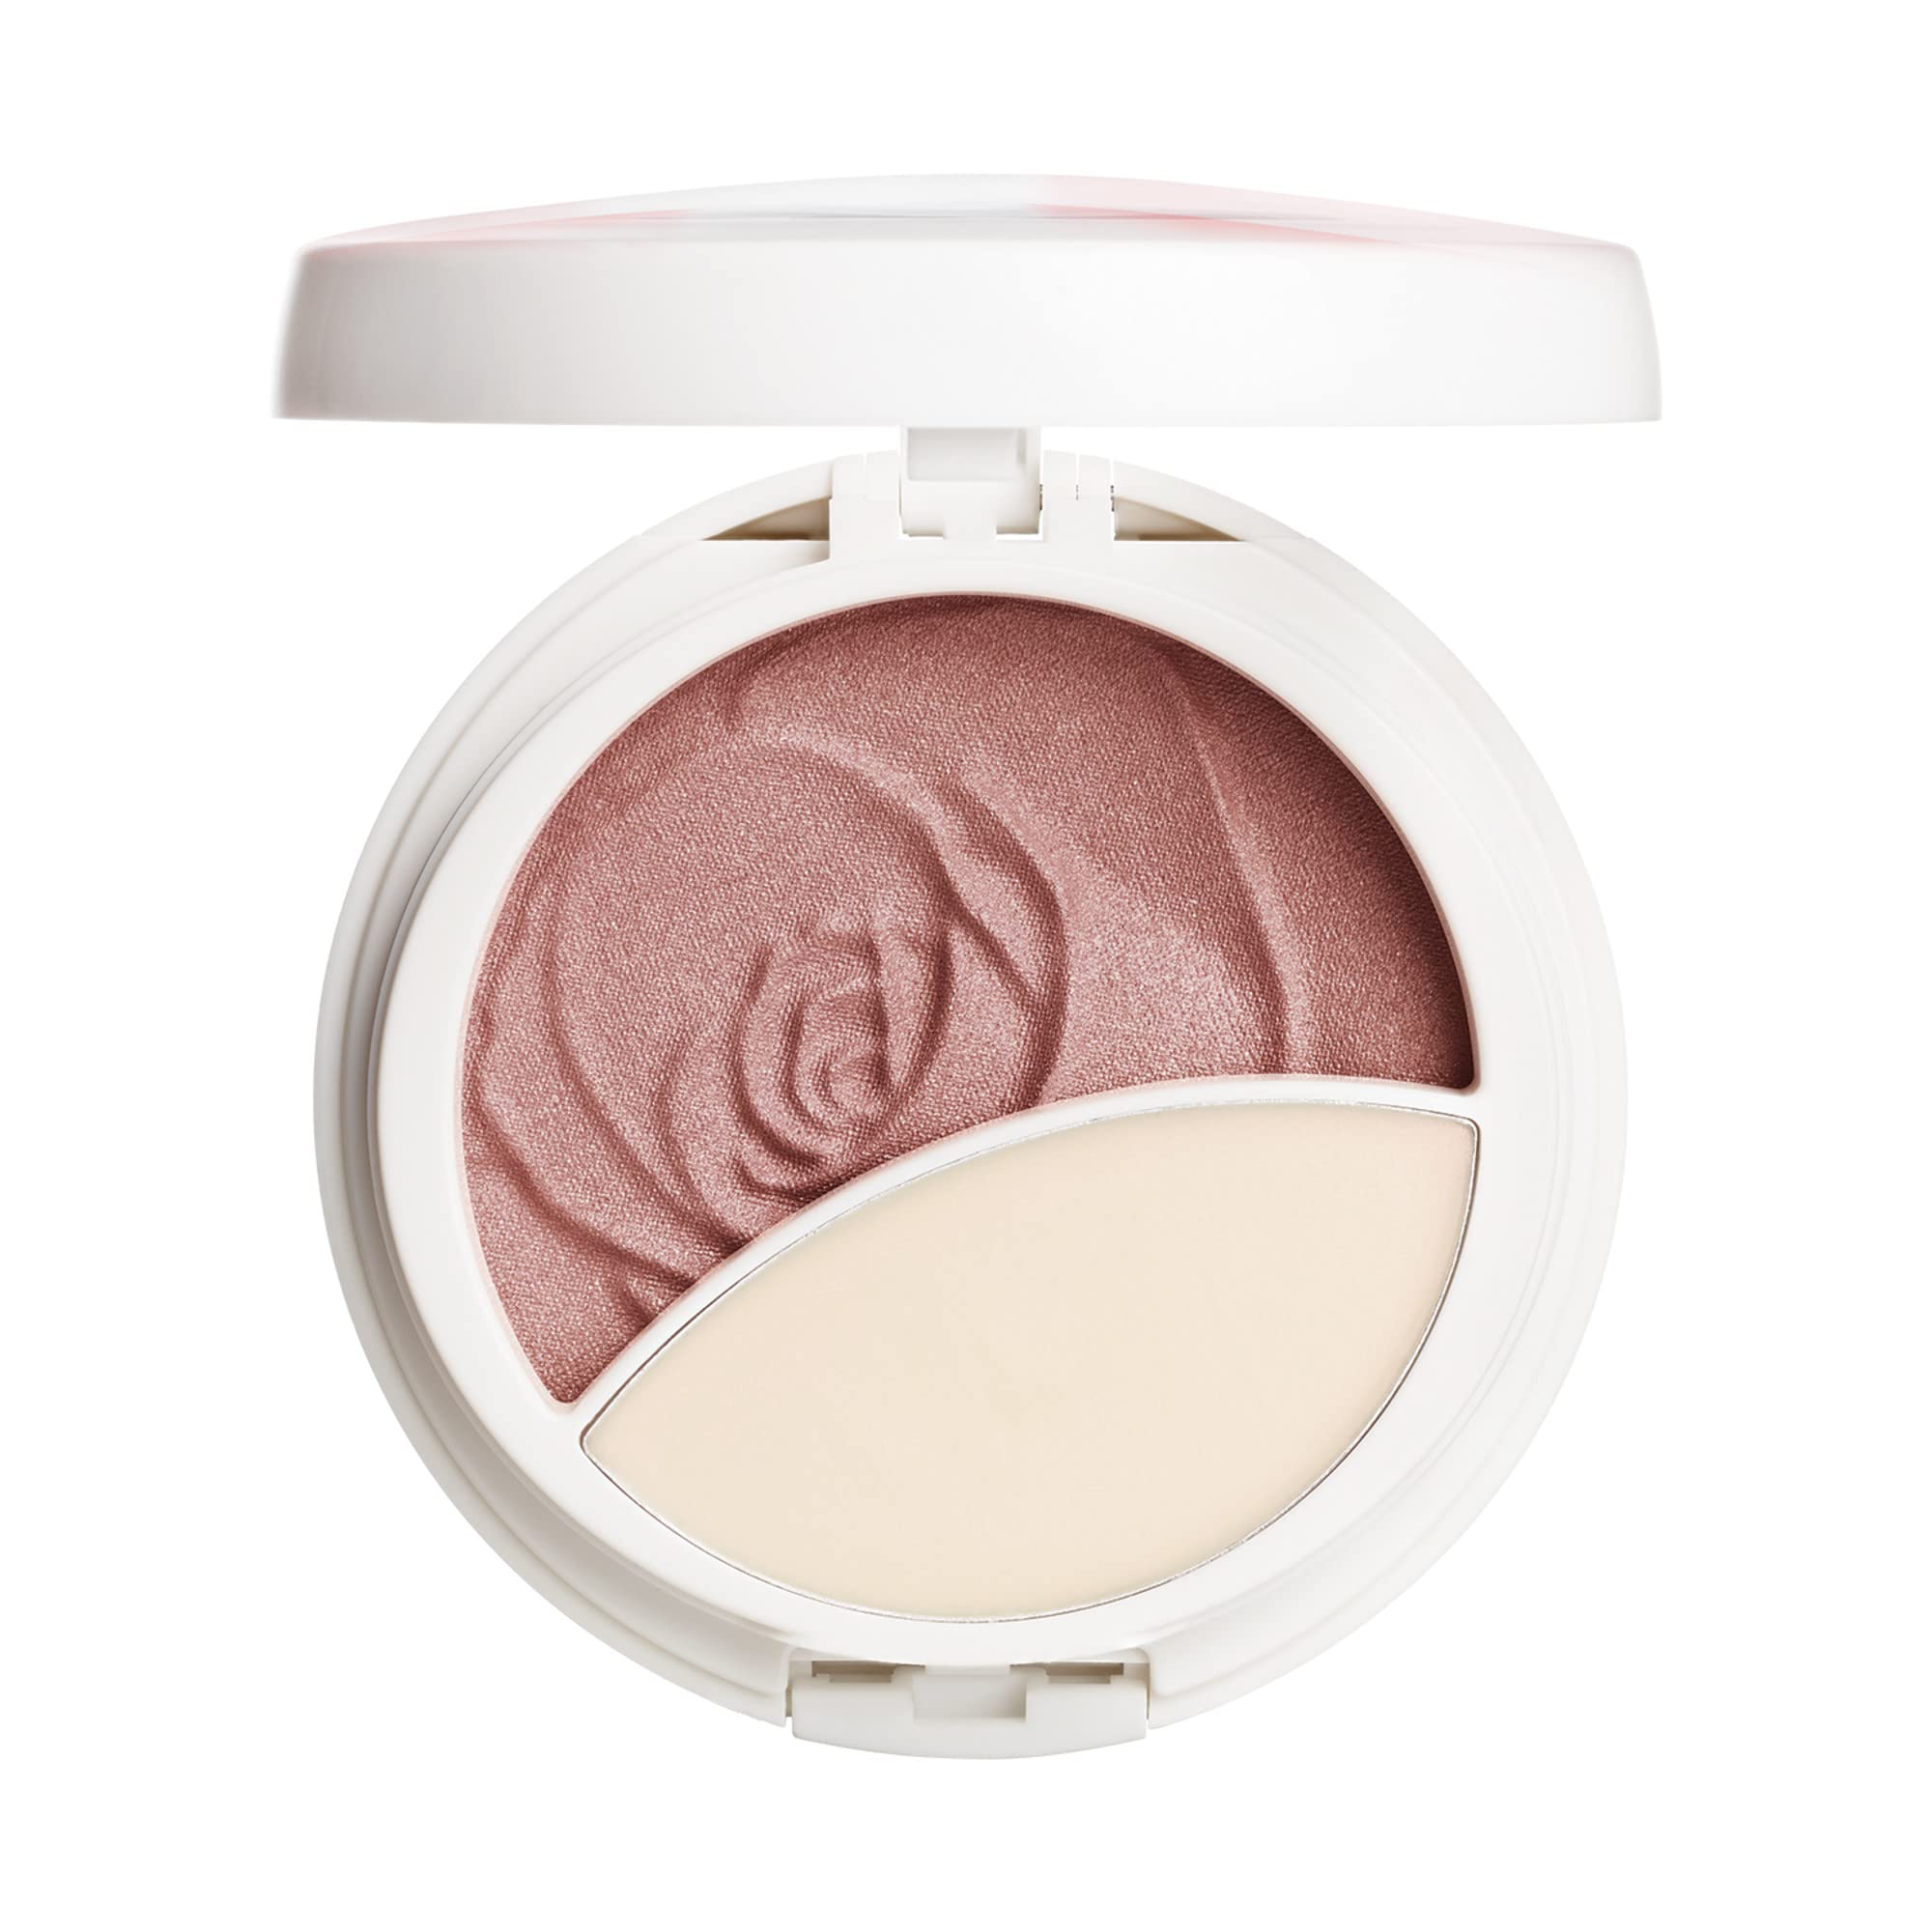 Physicians Formula Yes Way Rosé Balm, Brightening Rose, 0.94 Lbs